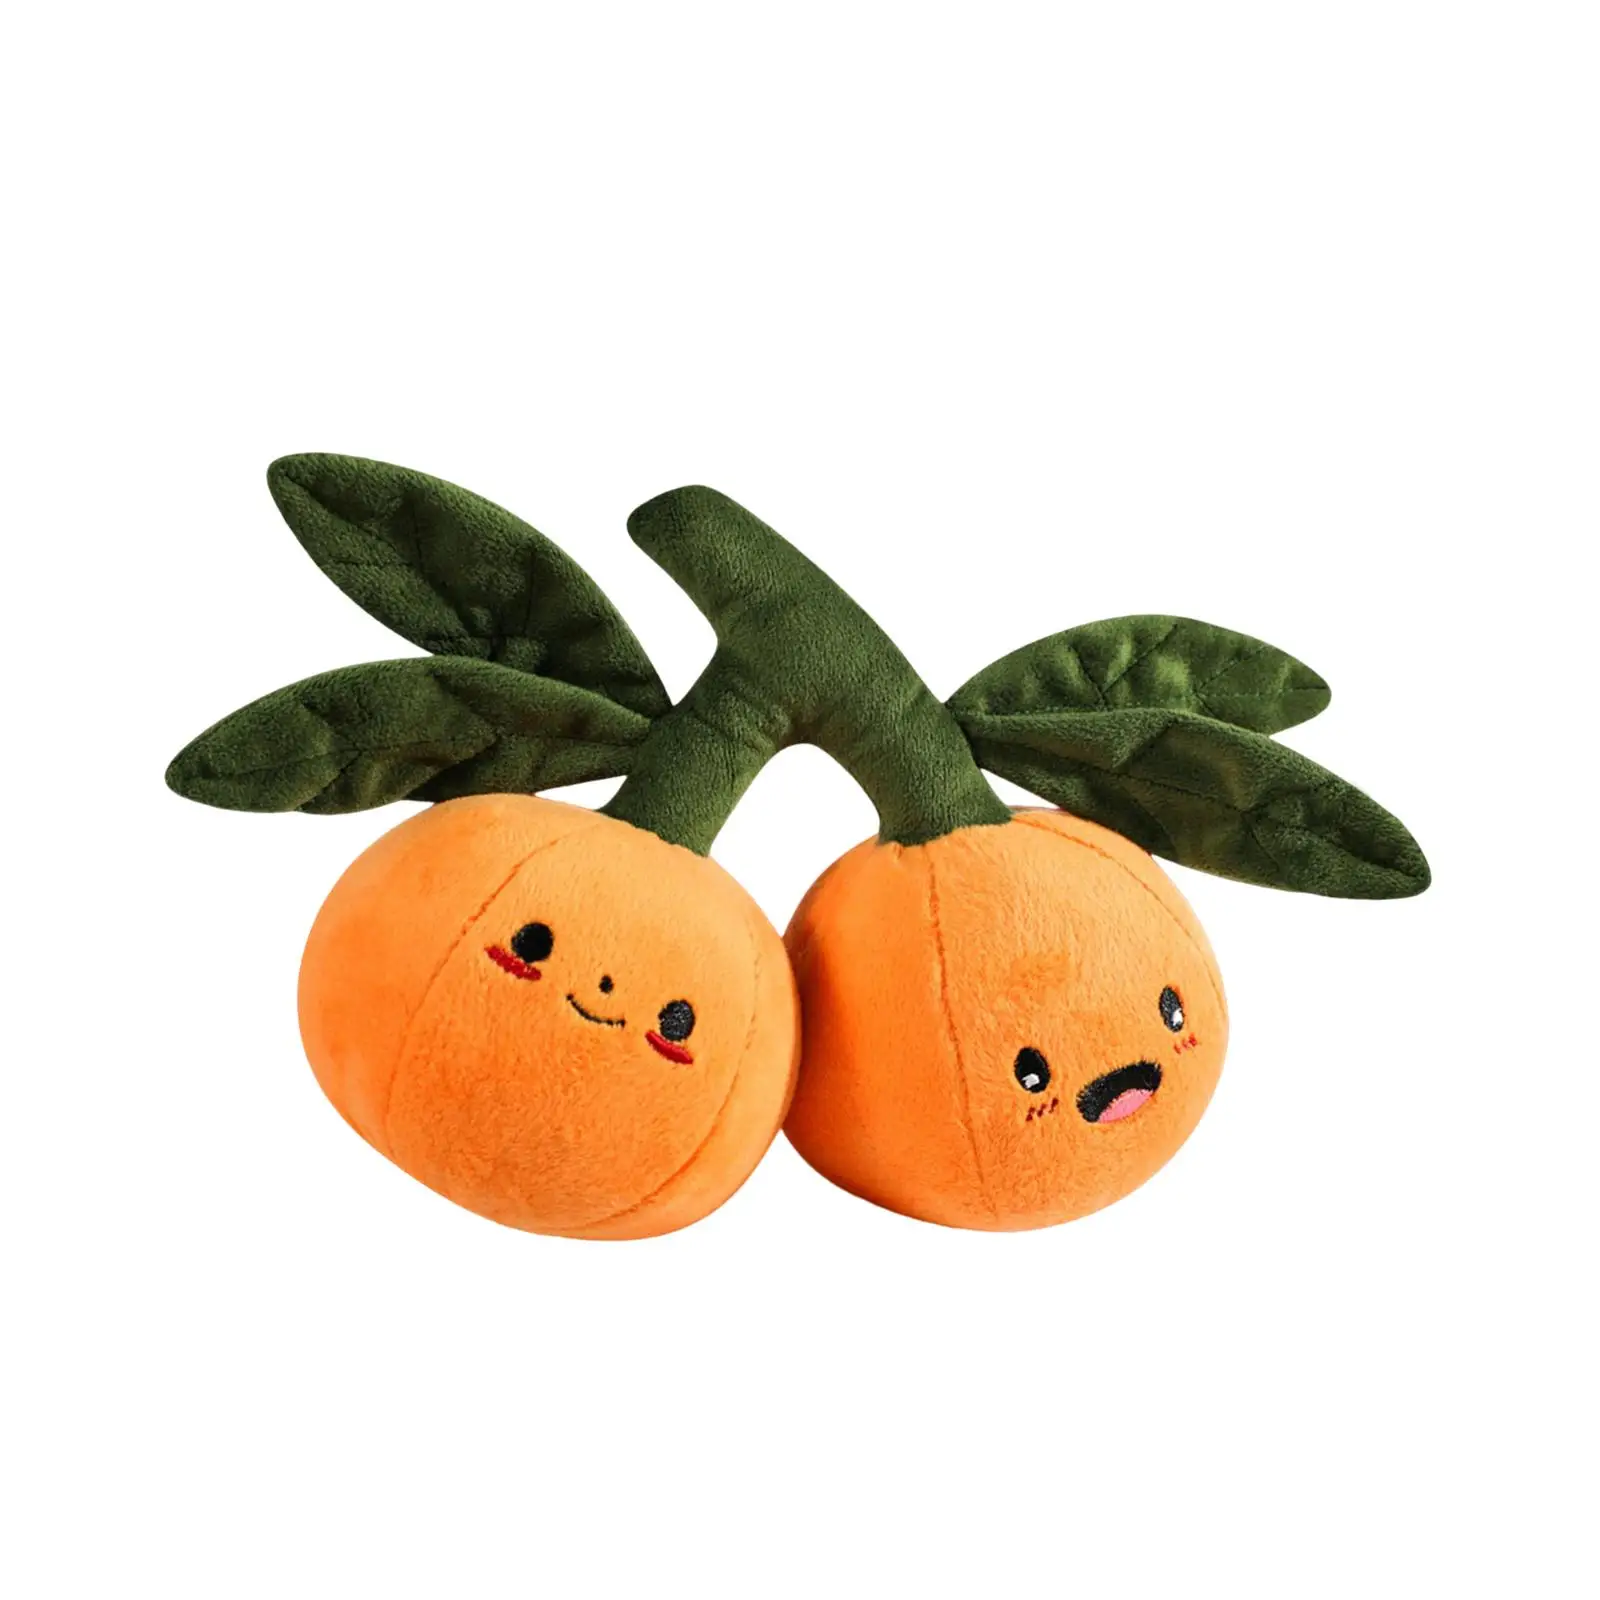 Stuffed Tangerine Toys Pretend Play Game Kids Birthday Gifts for Ornaments